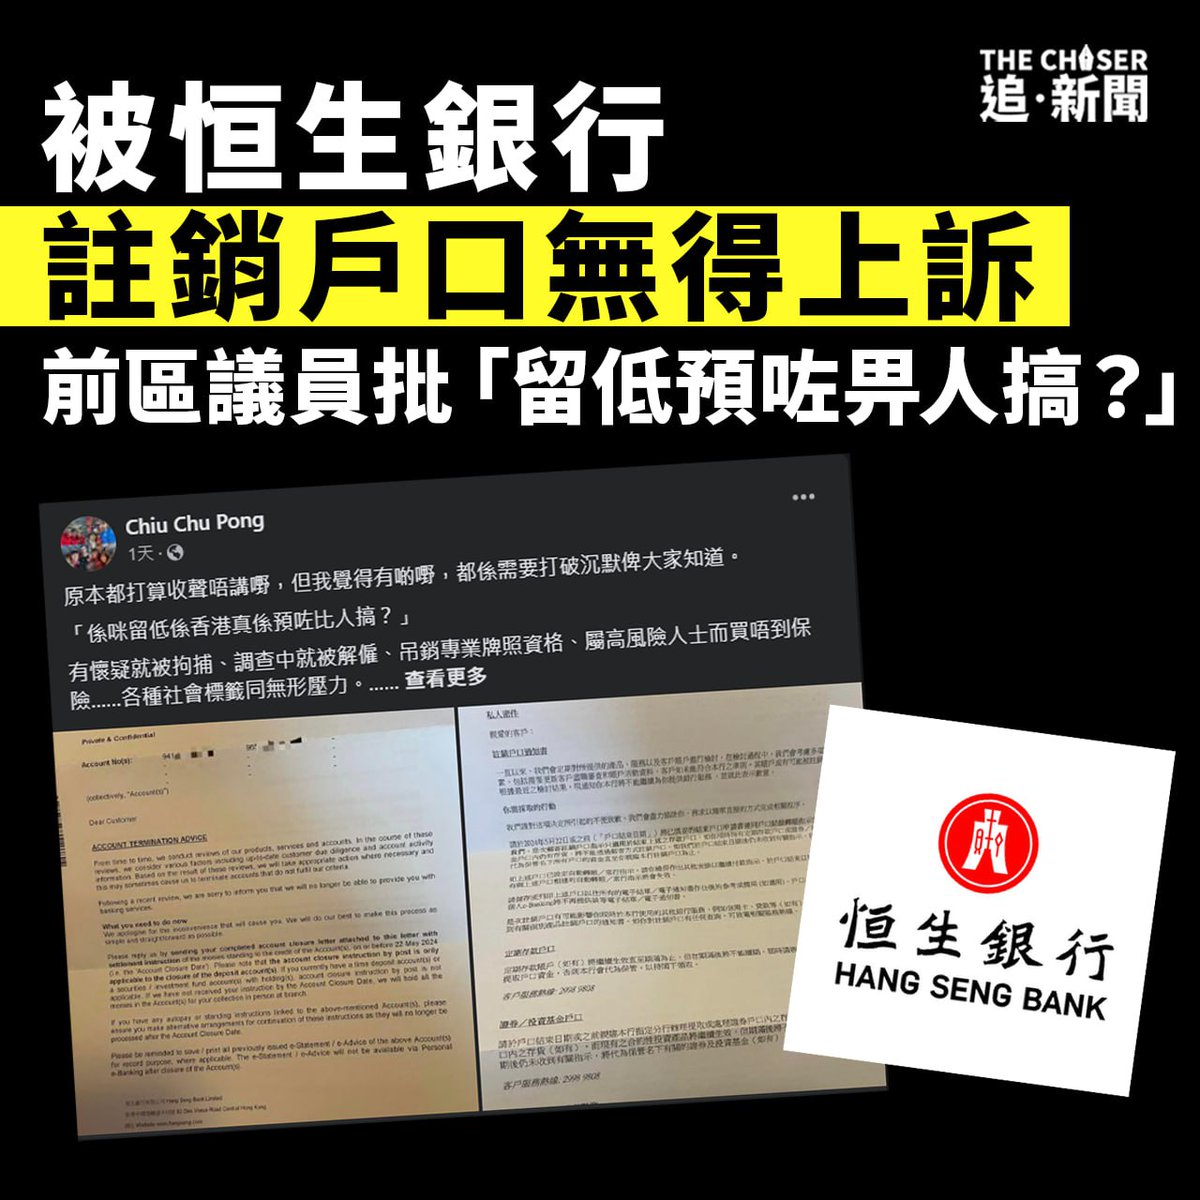 Former #HongKong pro-democracy District Councillor Sunny Chiu Chu-pong reports that Hang Seng Bank is cancelling his account w/out explanation. Many pro-democracy figures & groups have been frozen out of the financial system & prevented from raising funds tinyurl.com/3m62788d